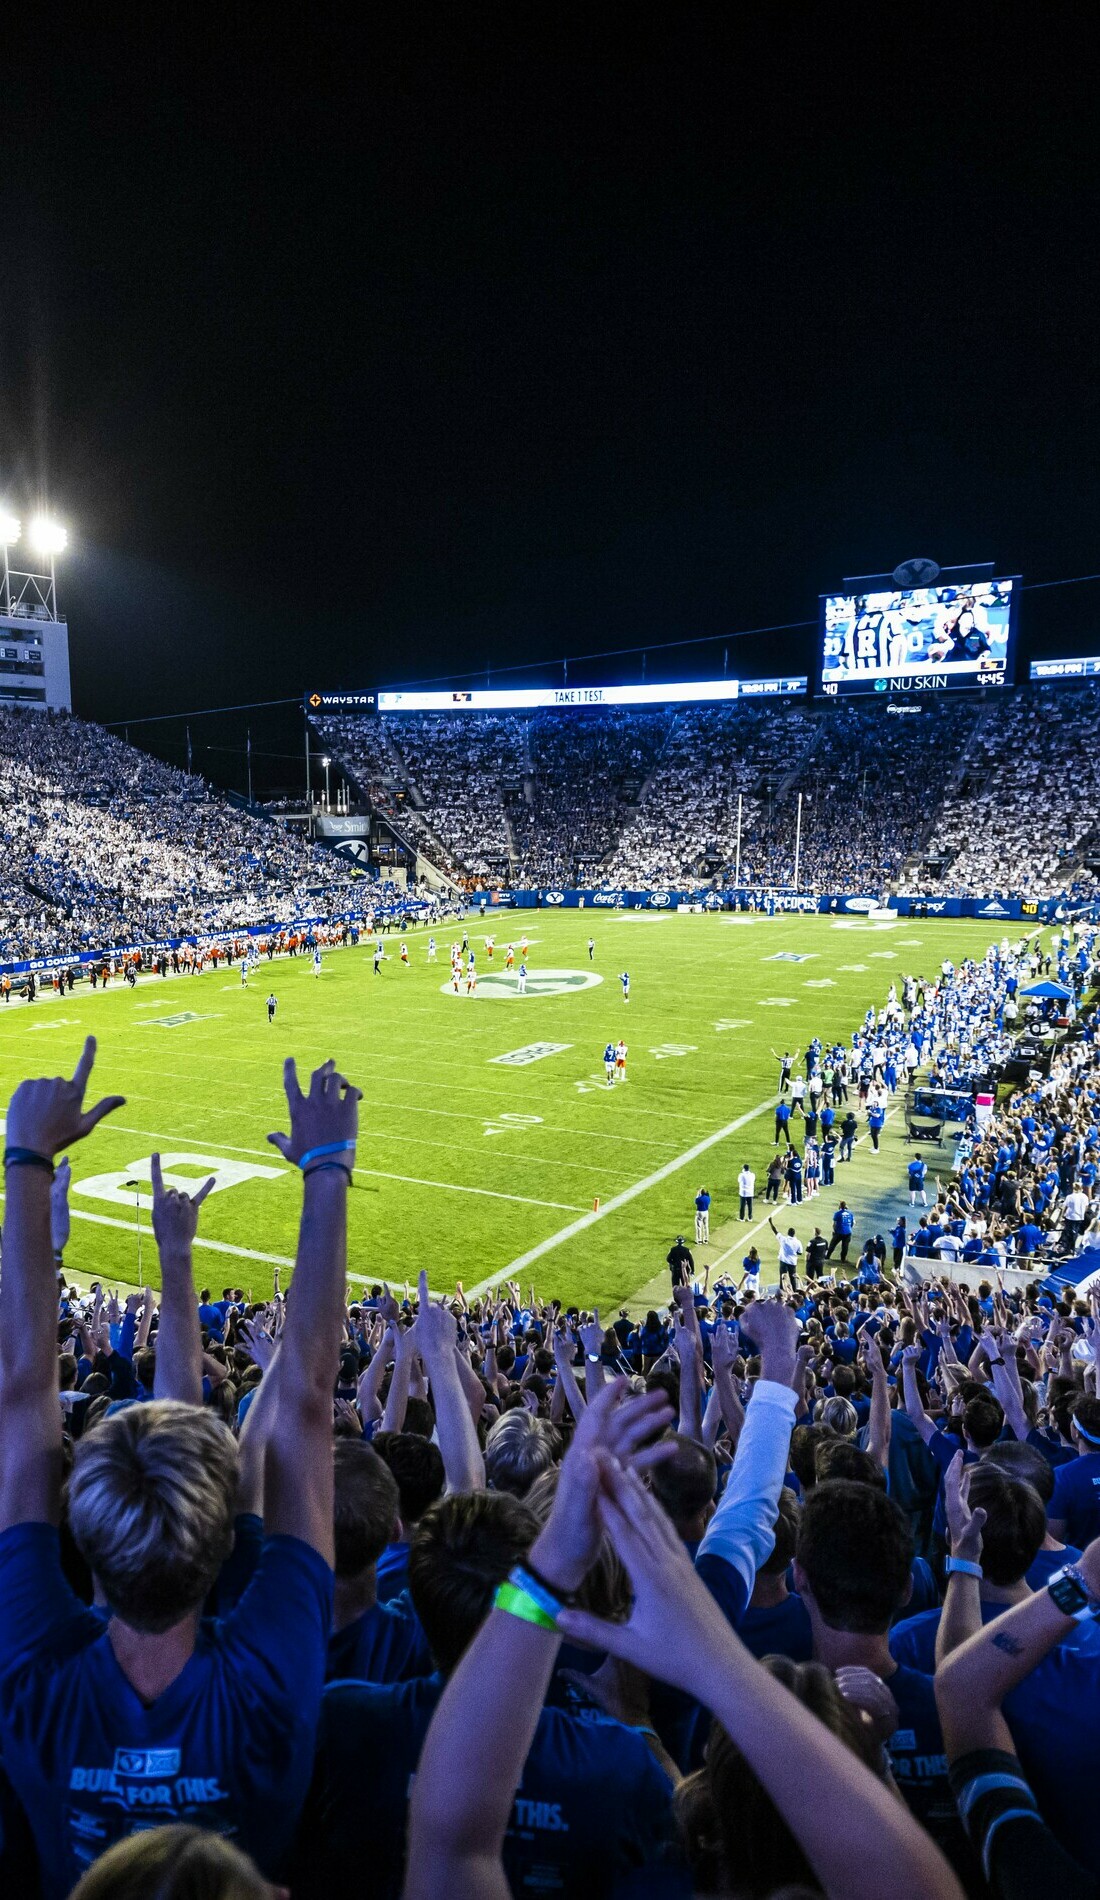 A BYU Cougars Football live event